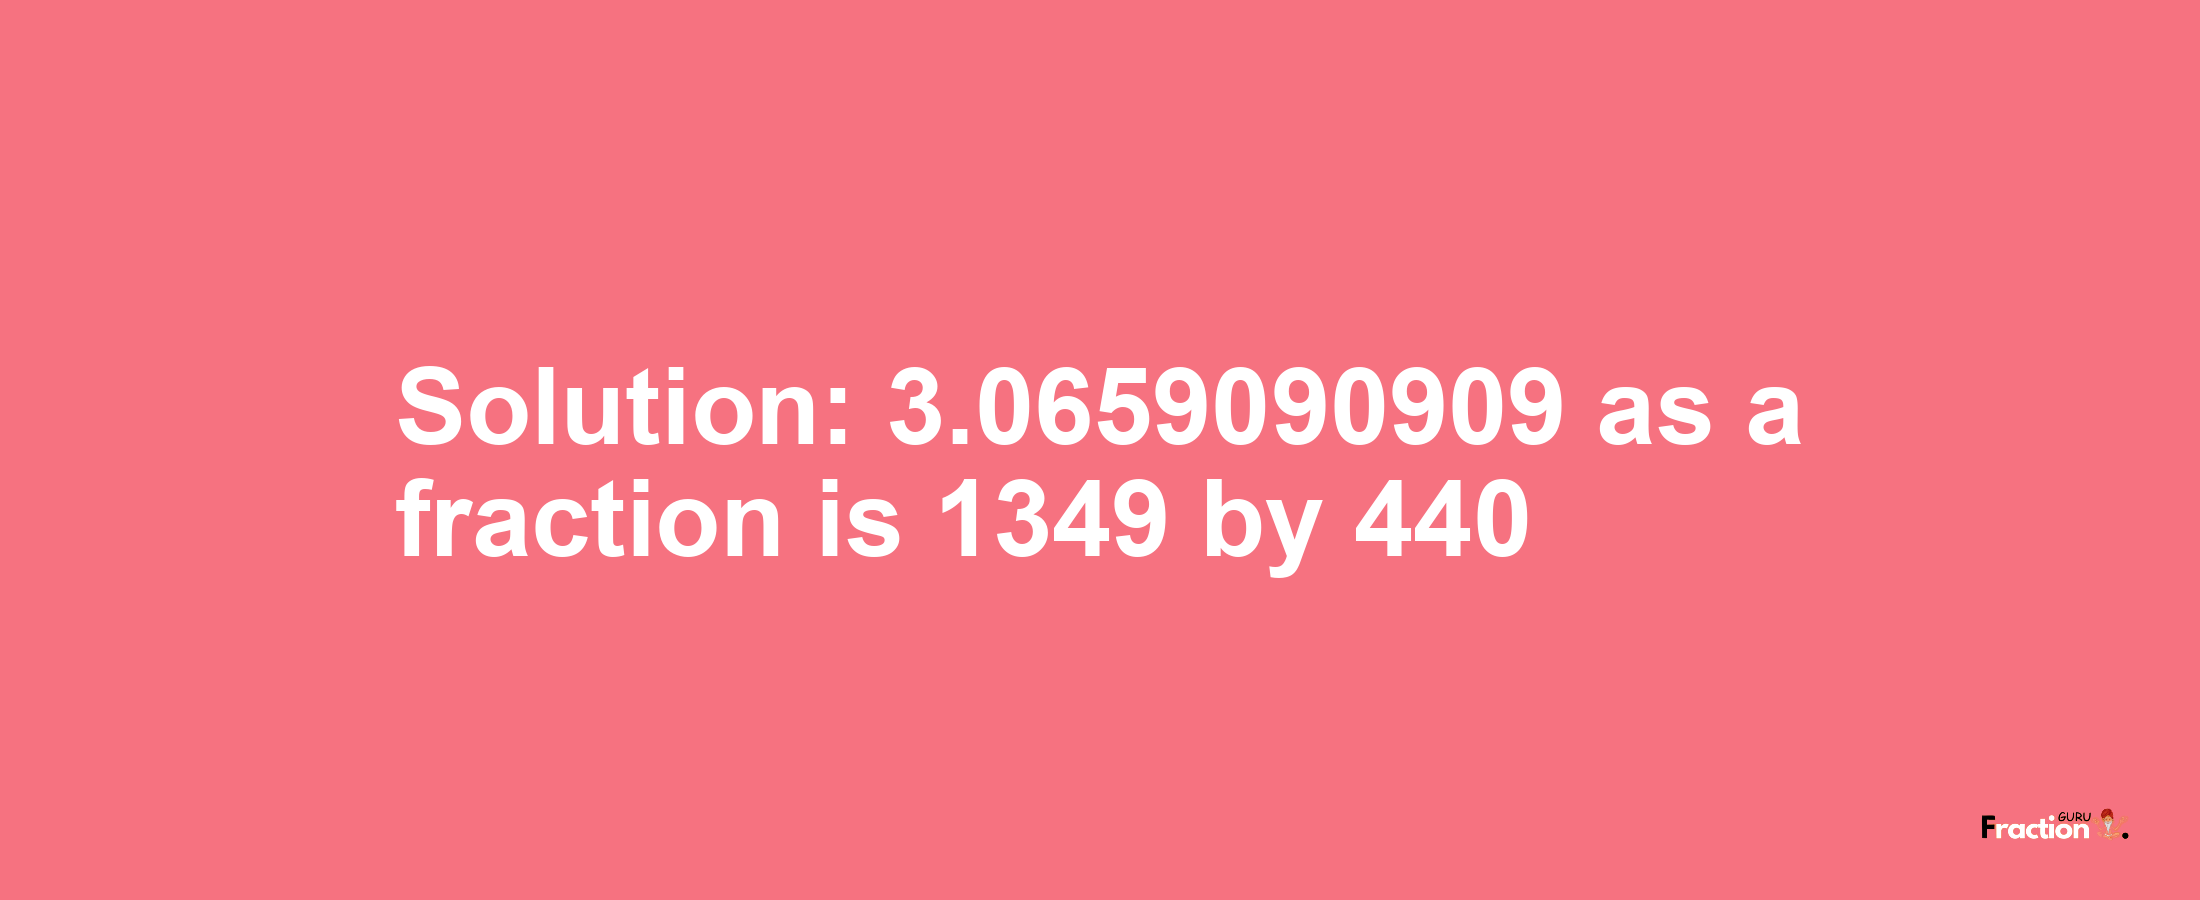 Solution:3.0659090909 as a fraction is 1349/440